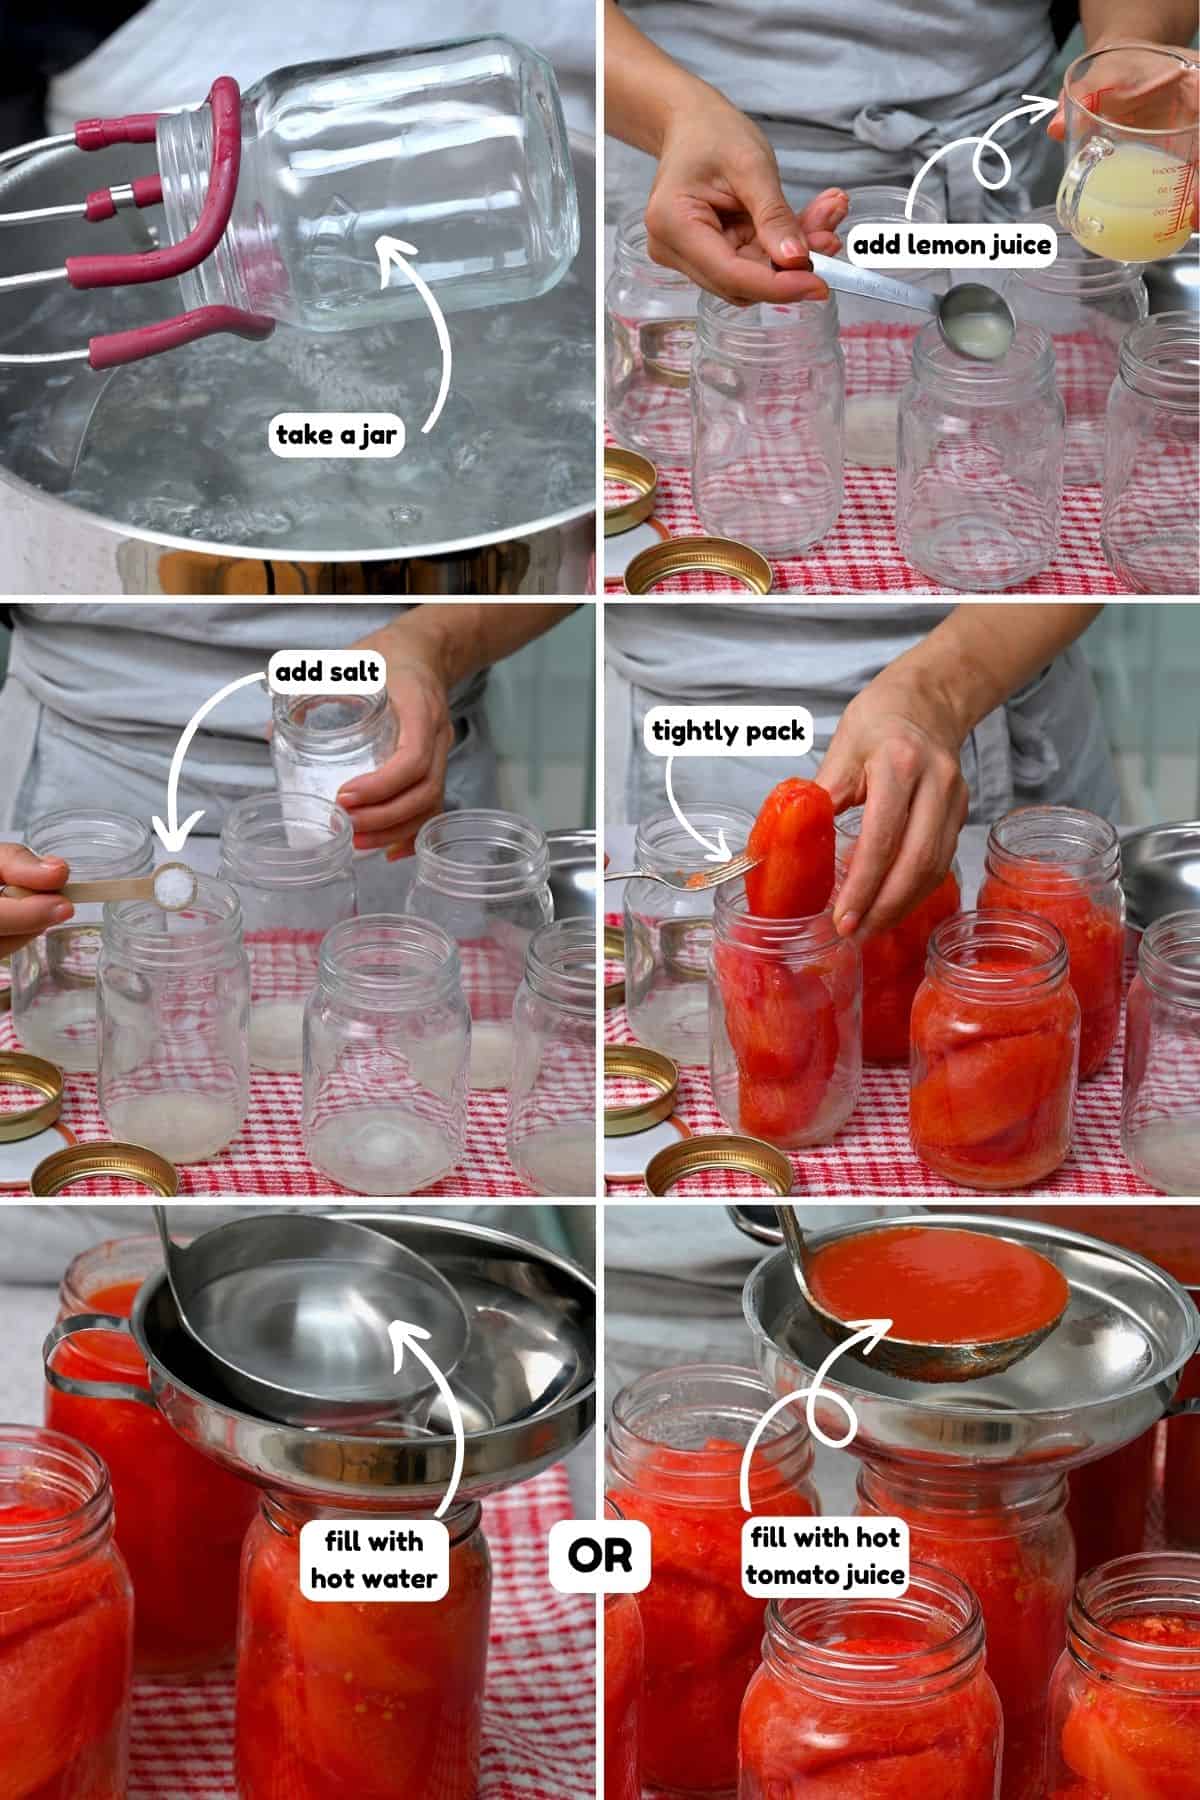 Steps for packing tomatoes into jars